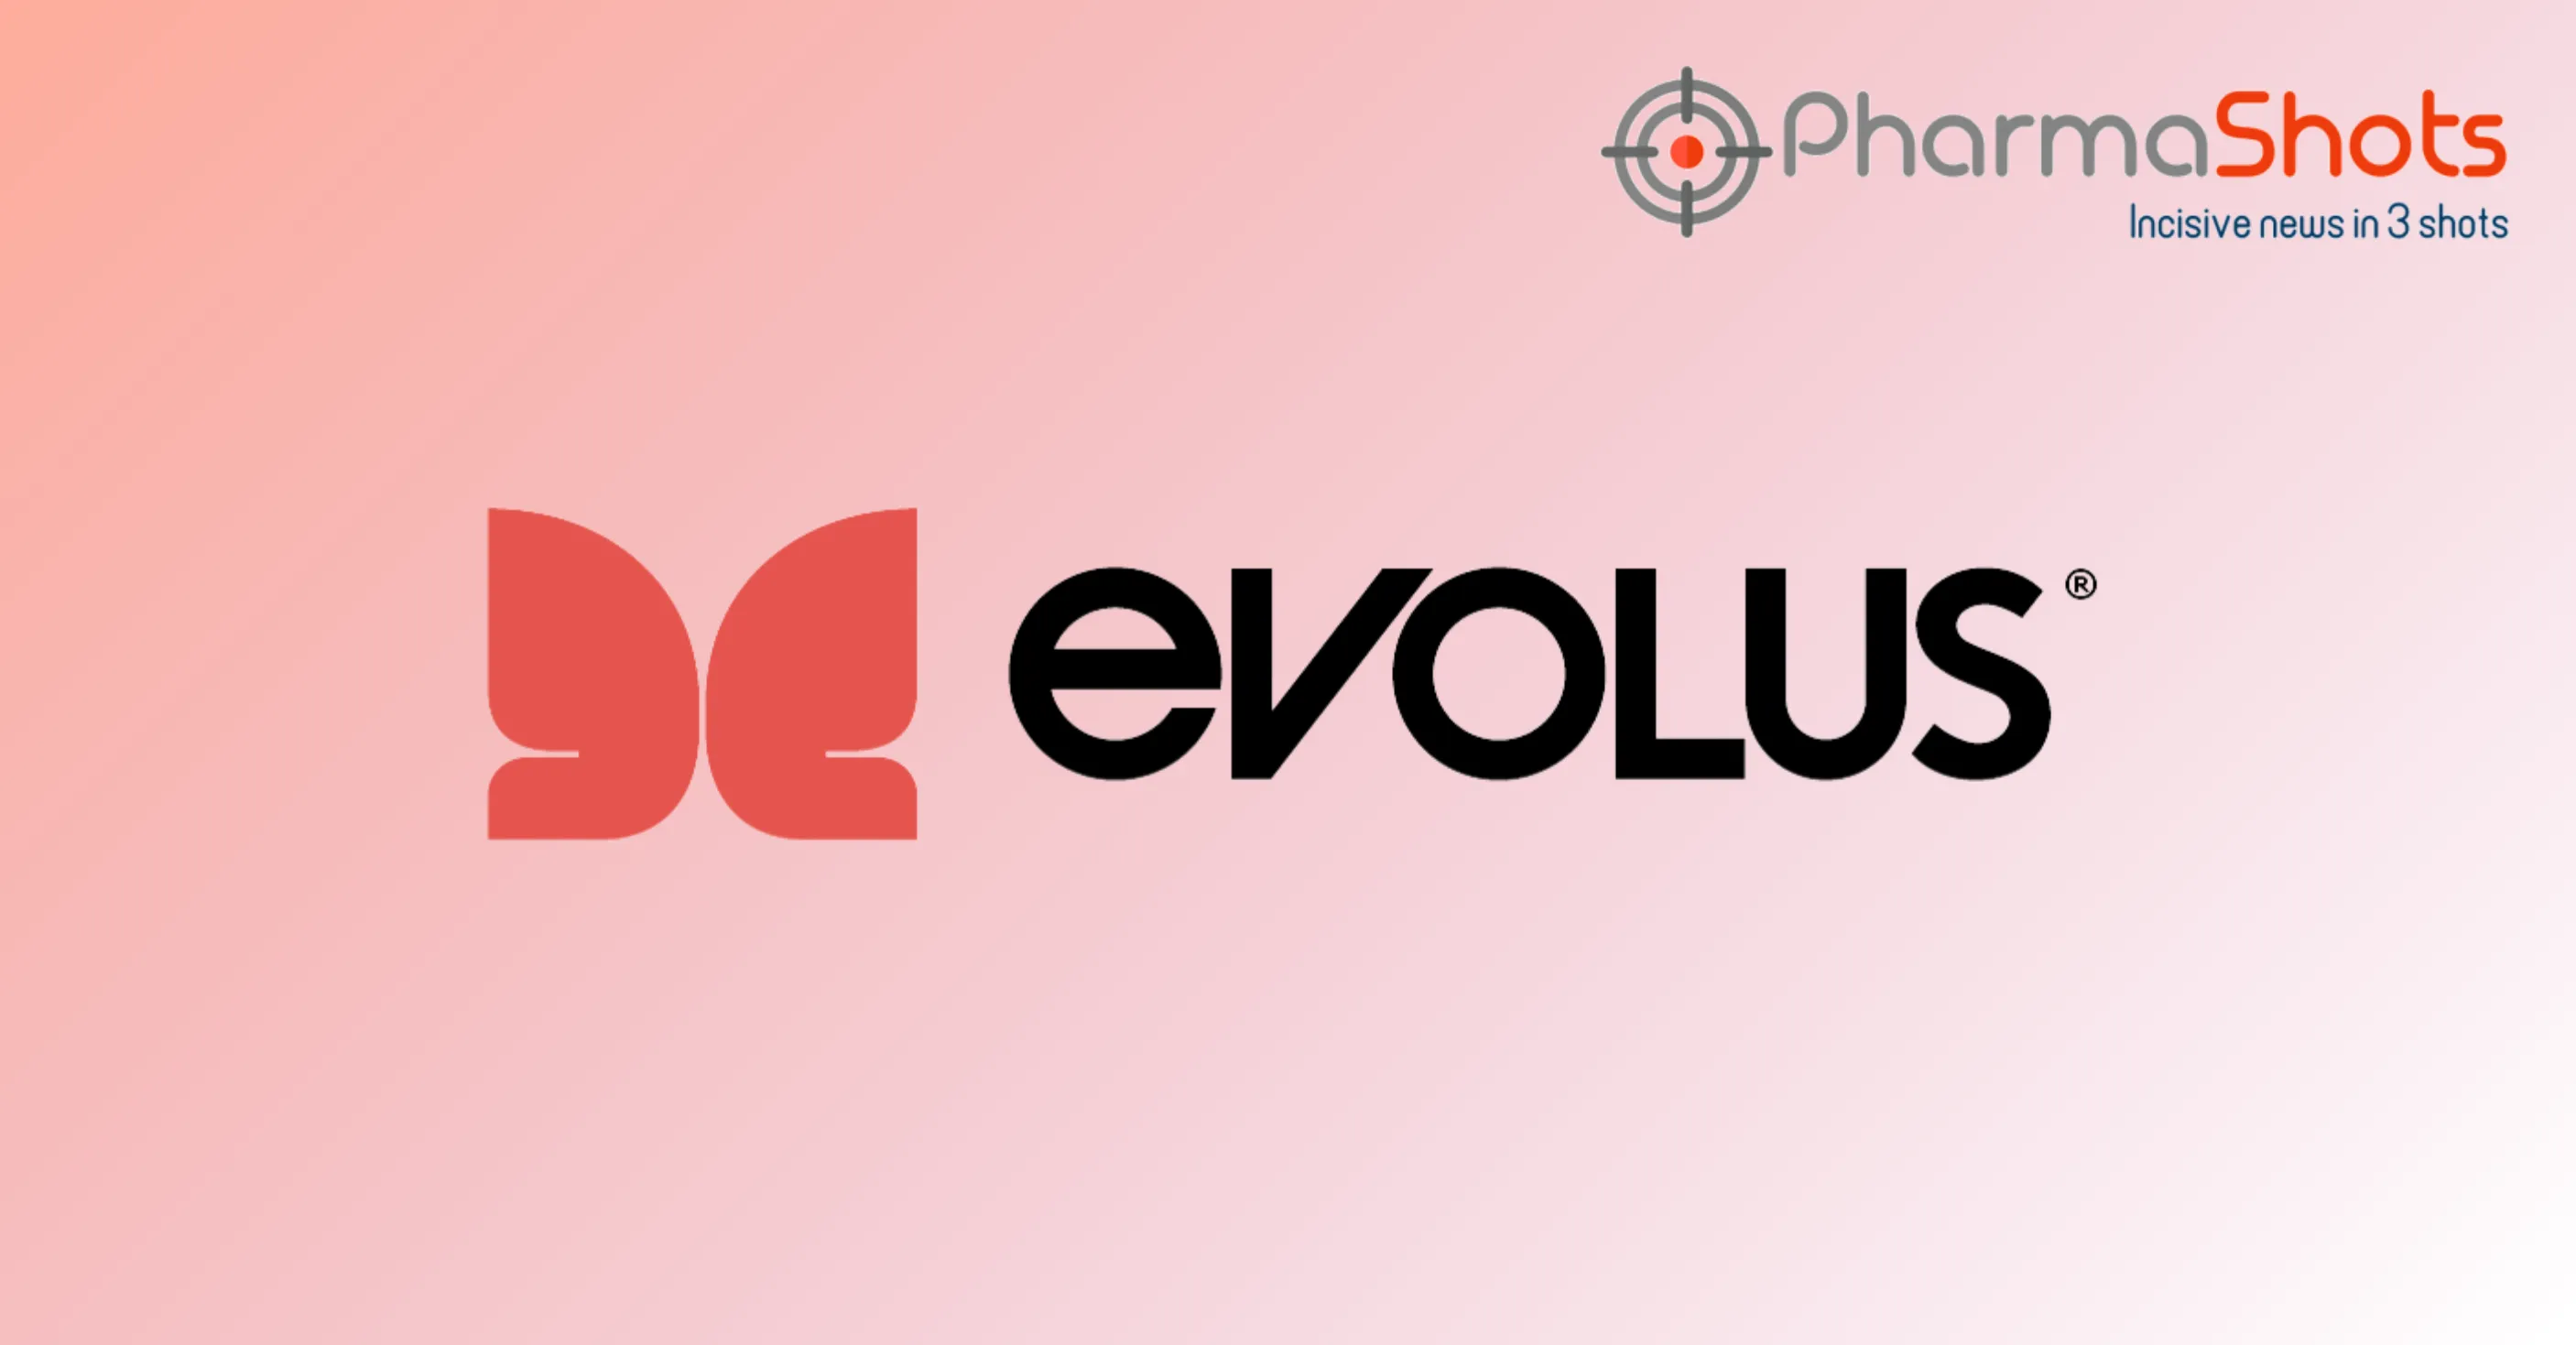 Evolus Reports Premarket Approval Application Submission to the US FDA for Evolysse Dermal Filler Products